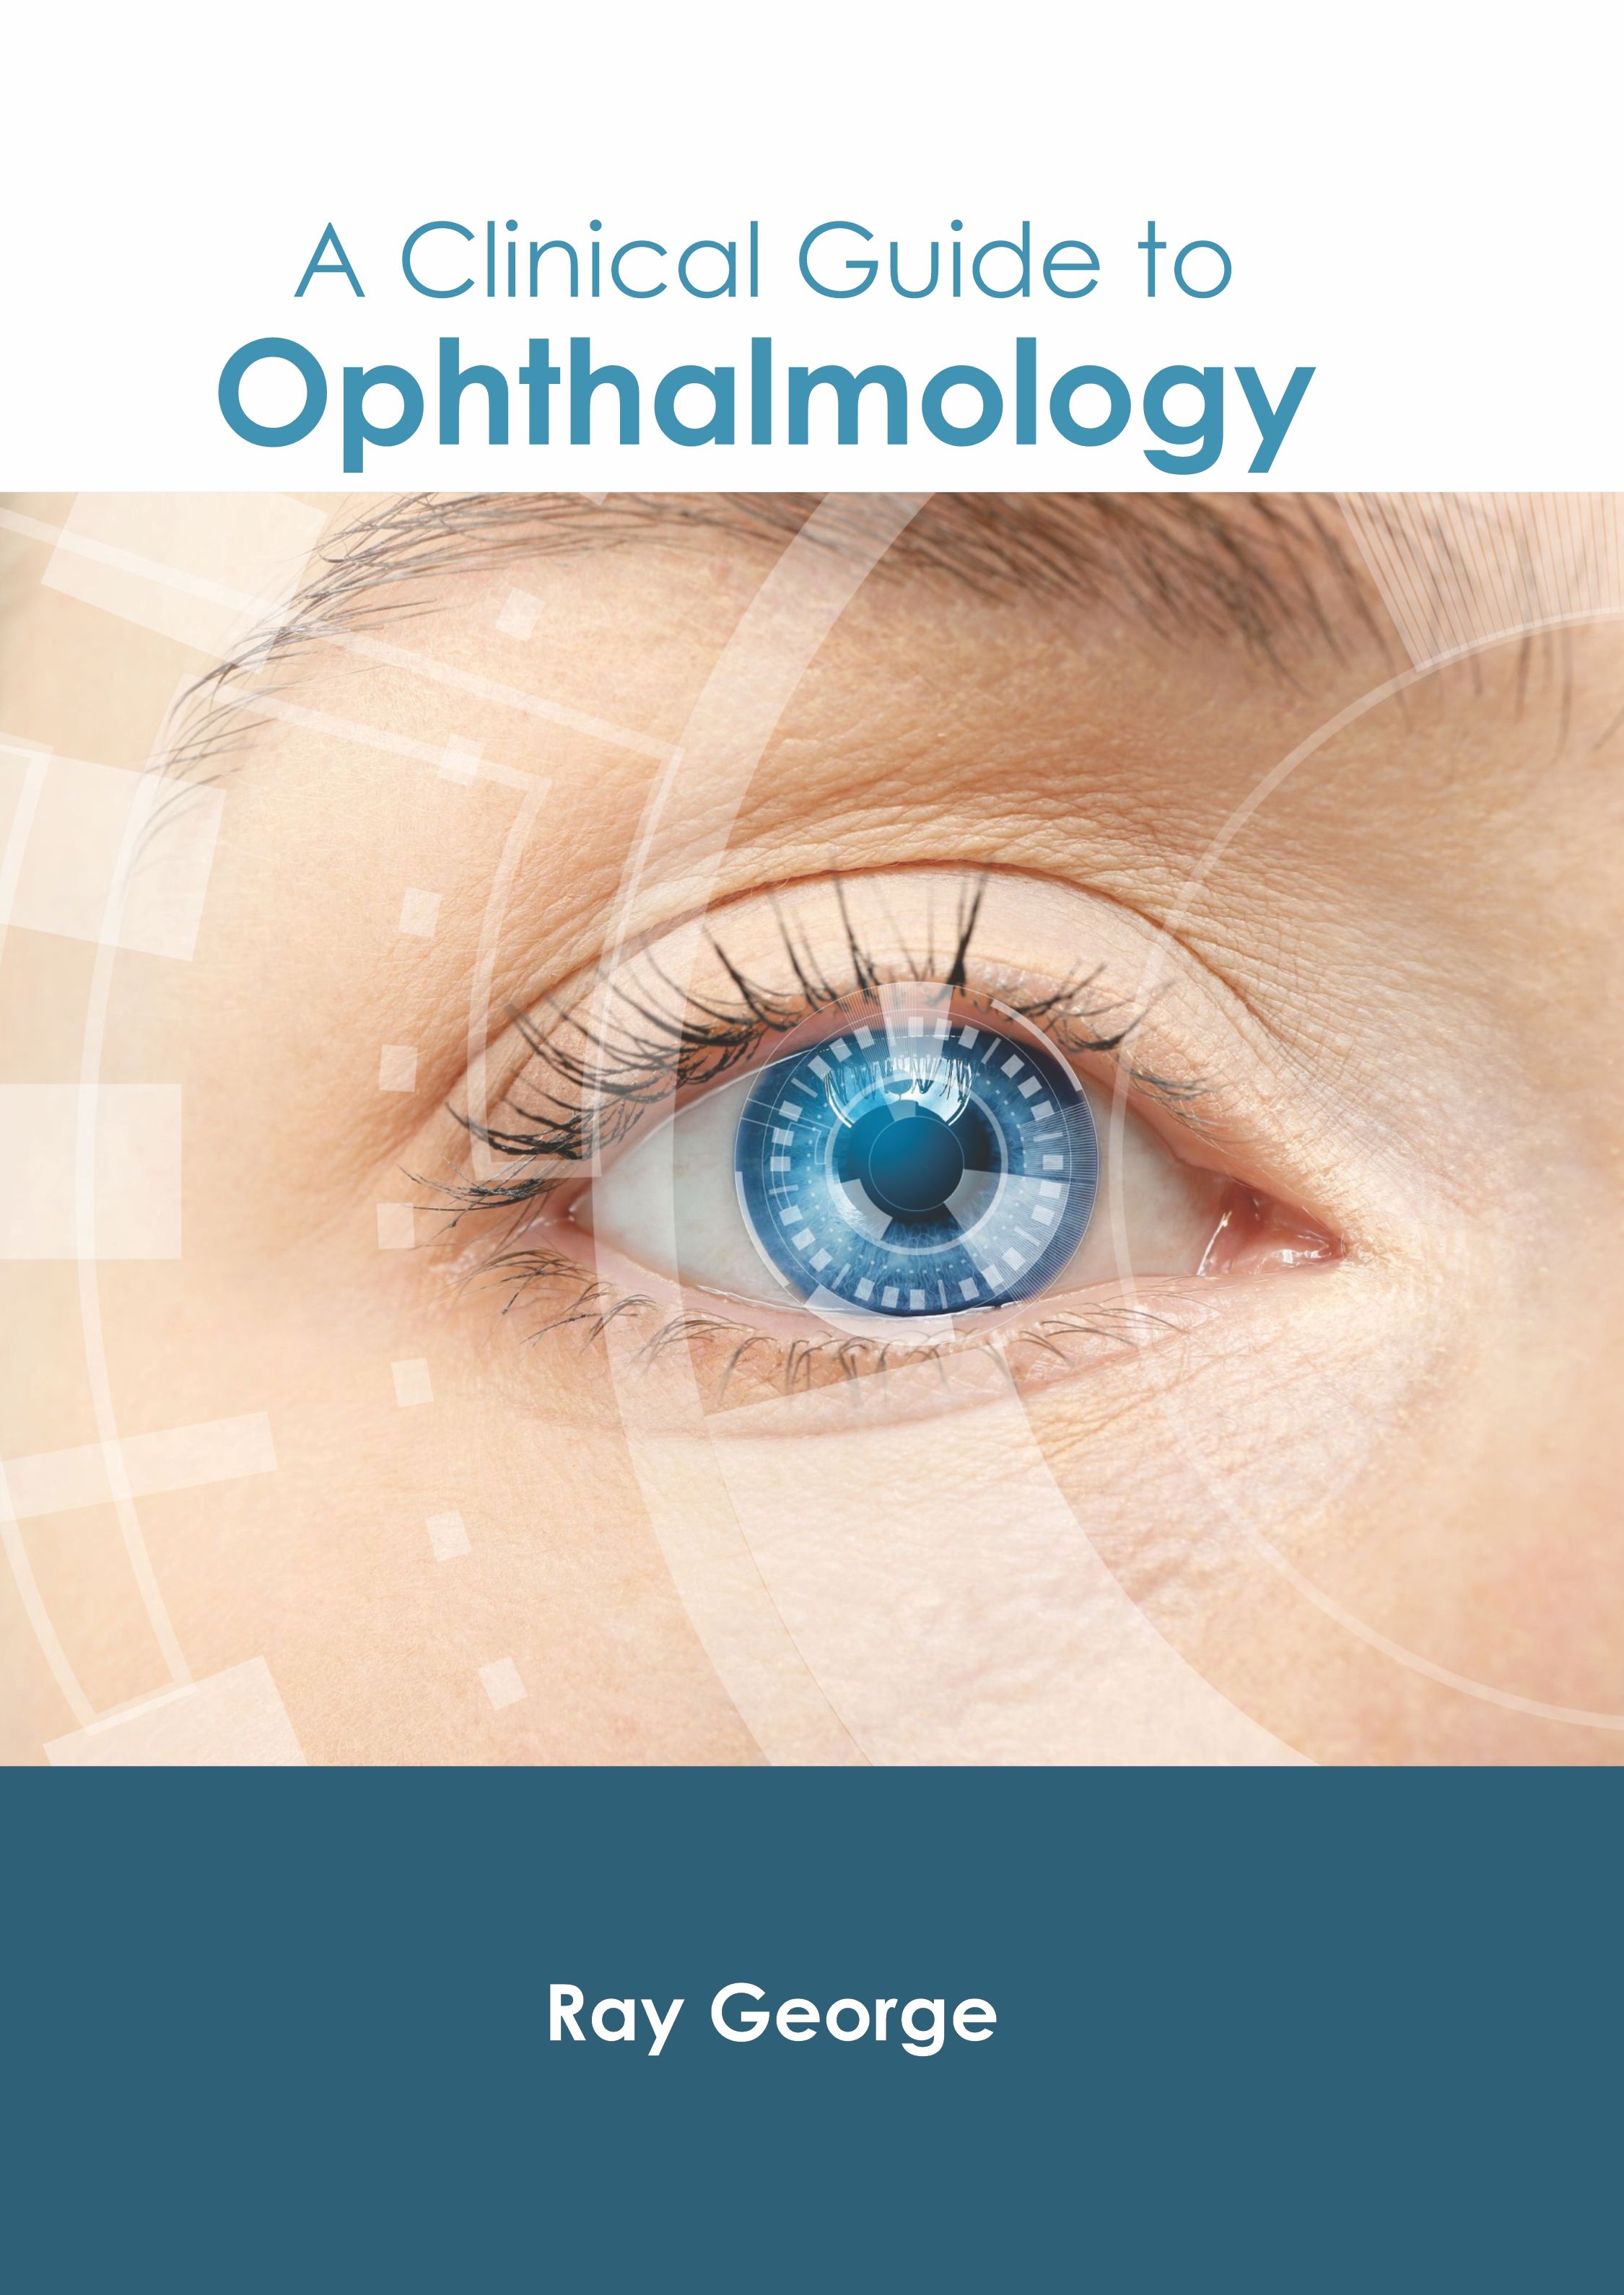 A CLINICAL GUIDE TO OPHTHALMOLOGY